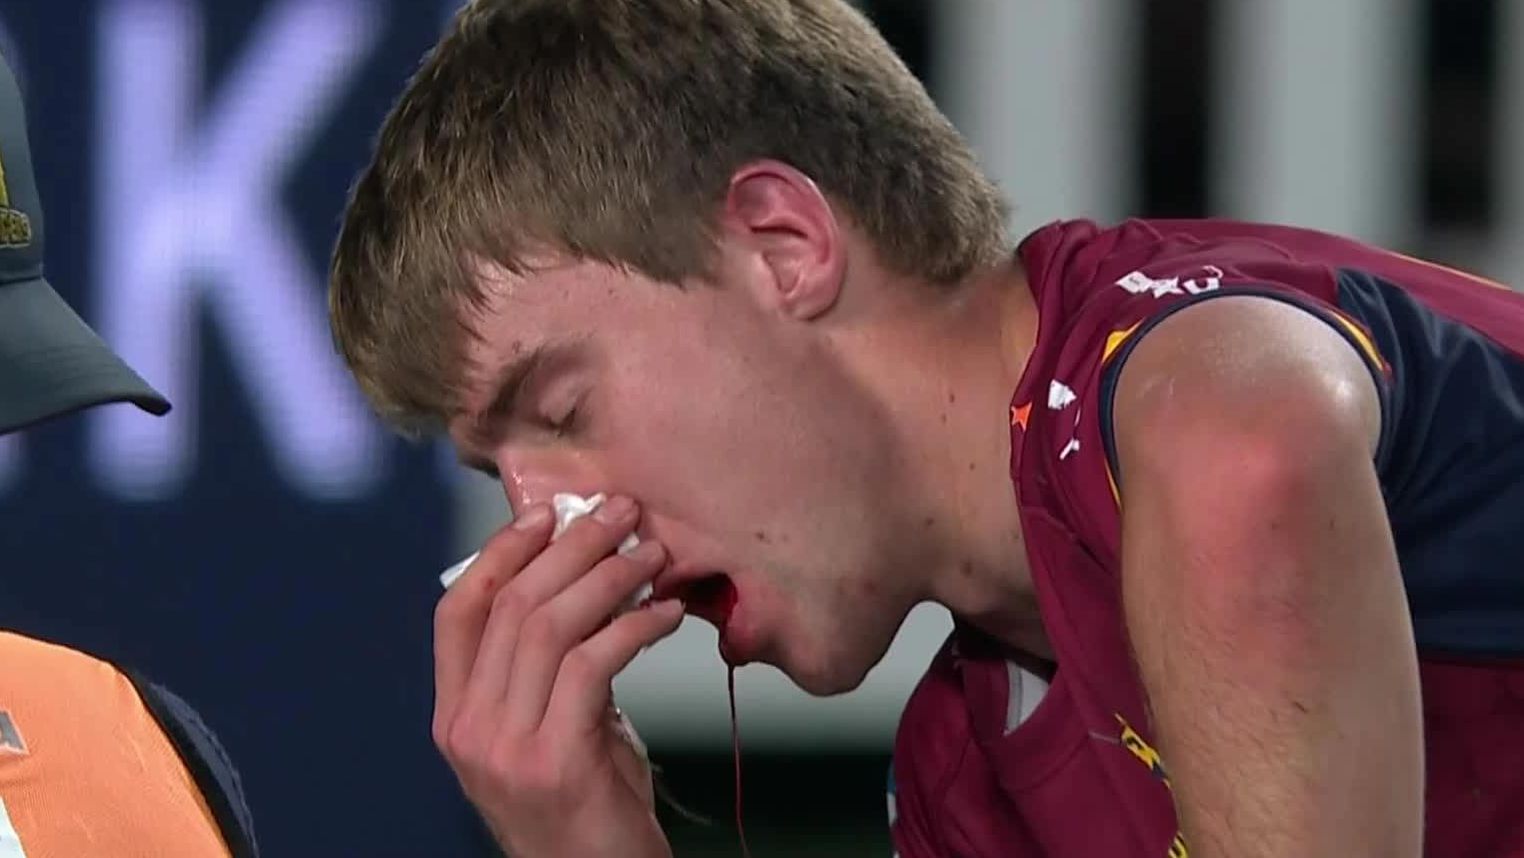 Blood pours from the mouth of Highlanders player Cameron Miller.